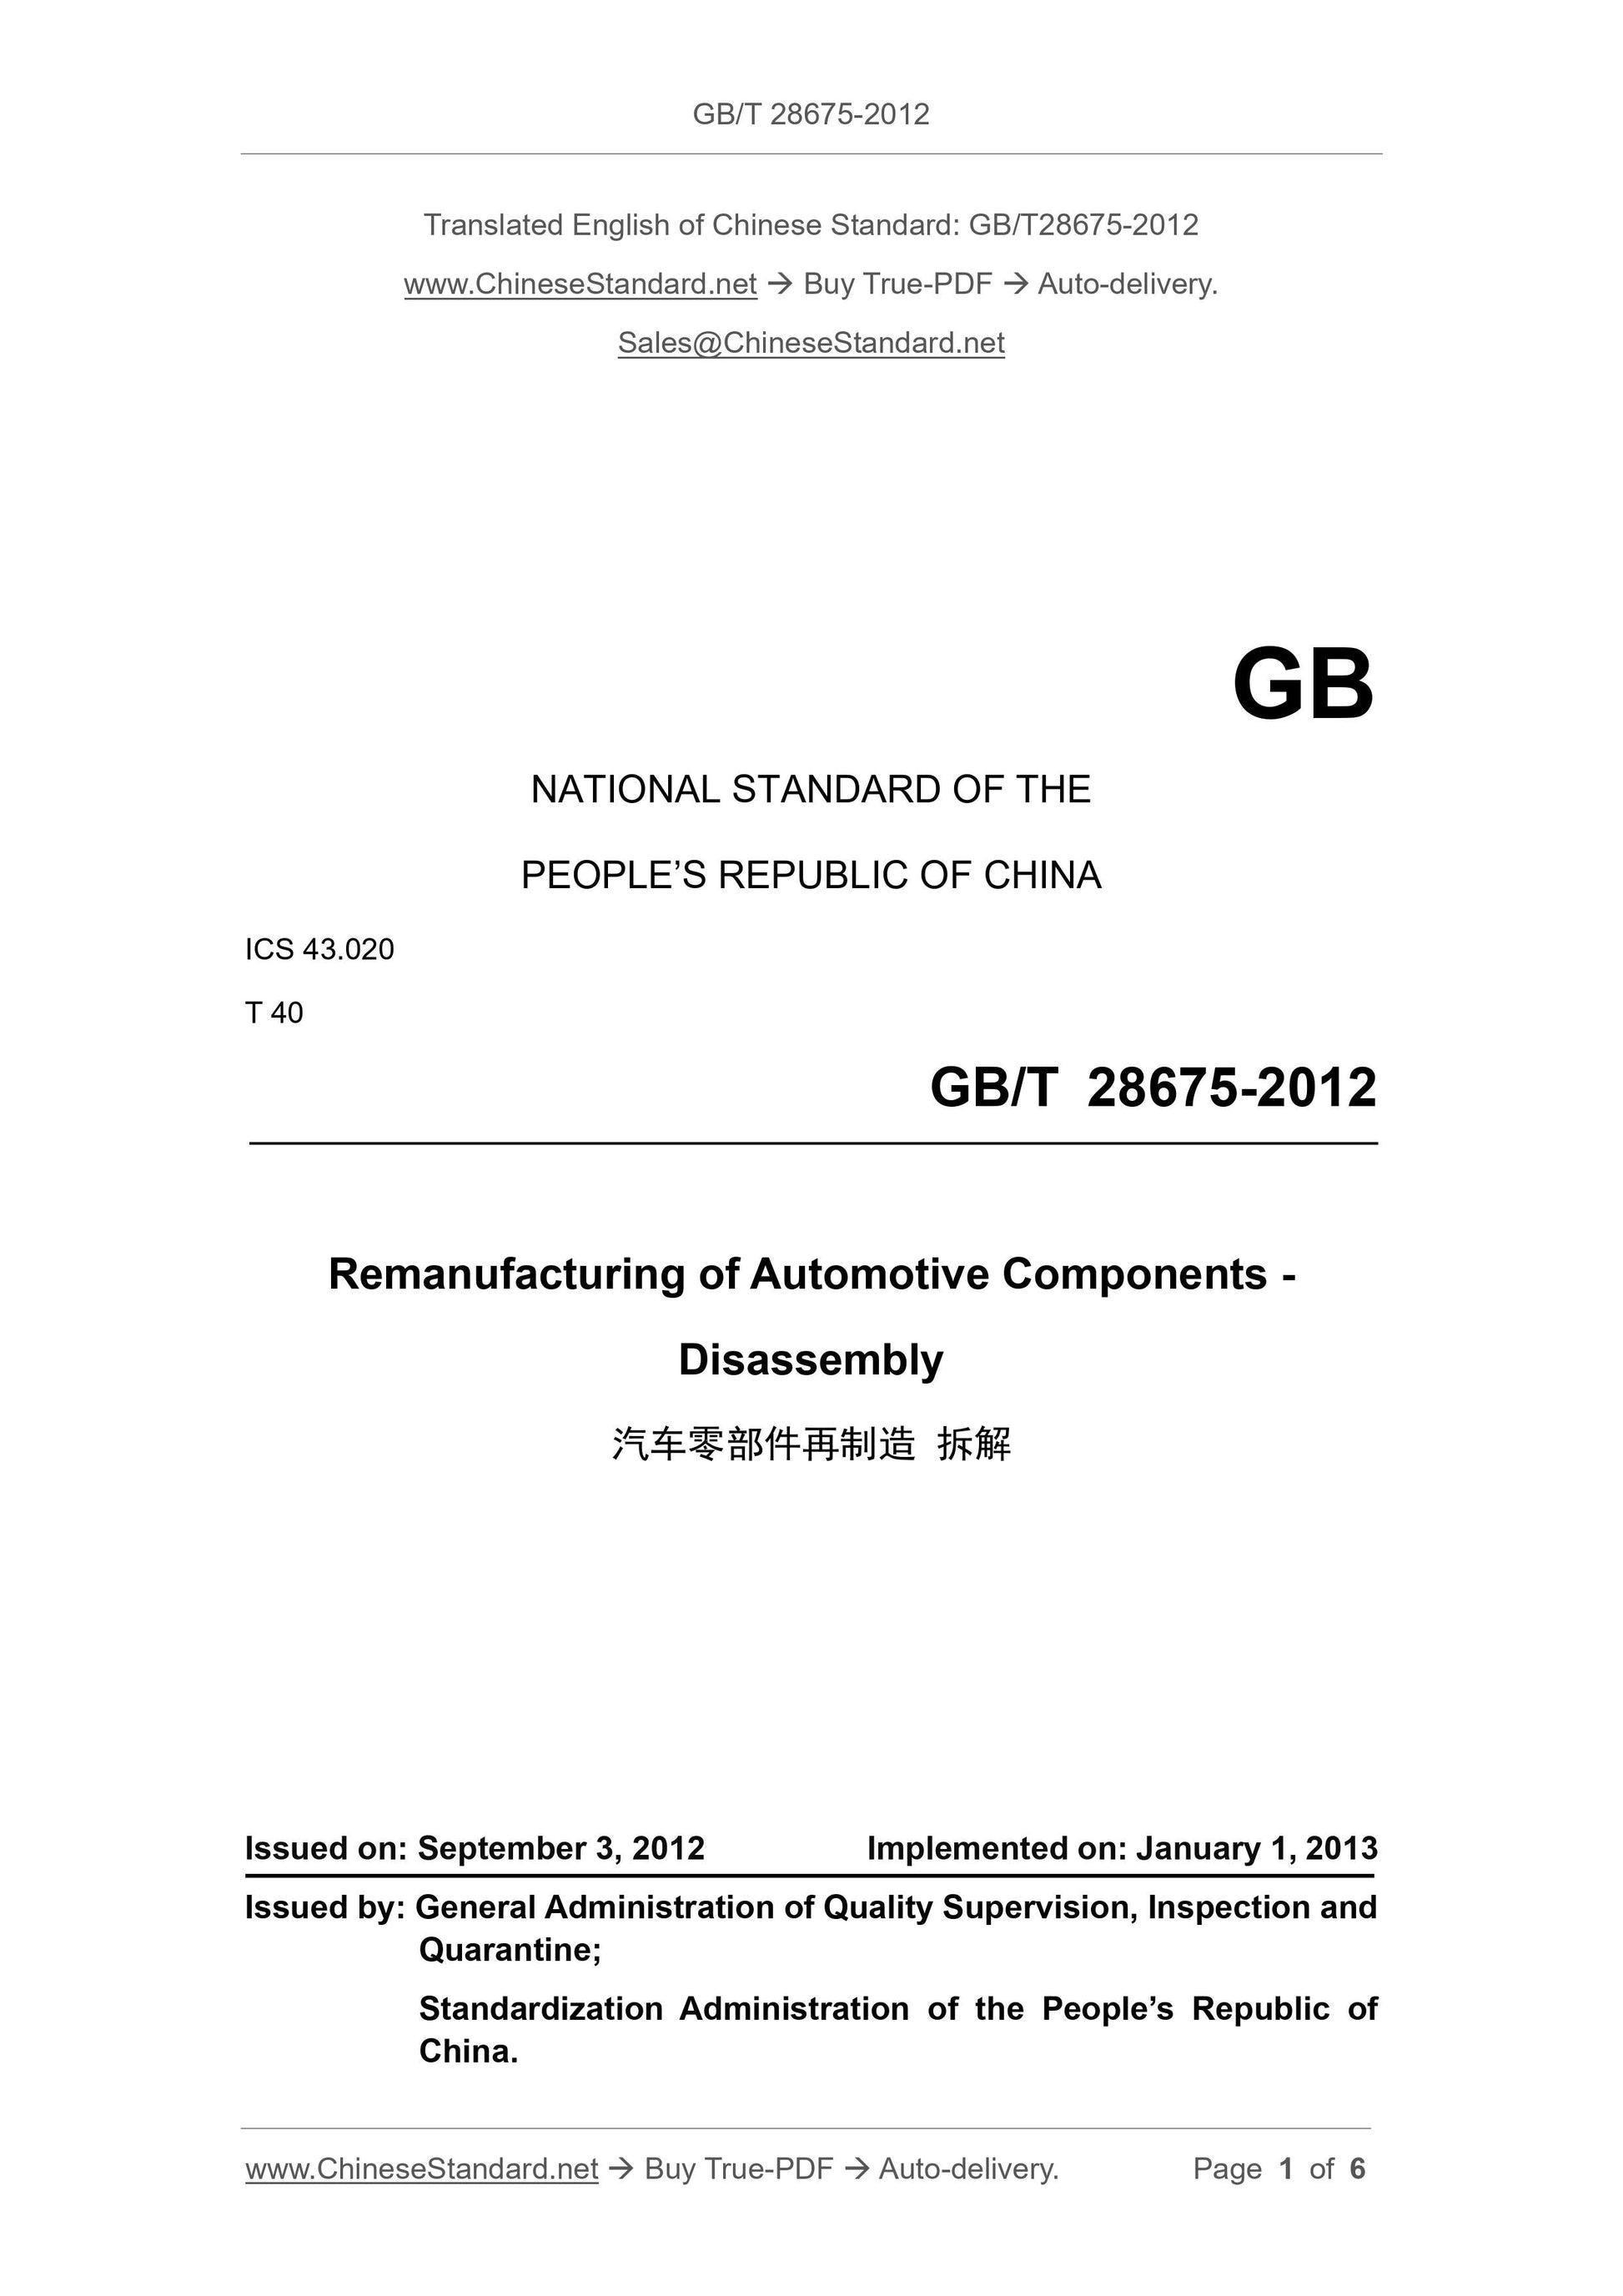 GB/T 28675-2012 Page 1